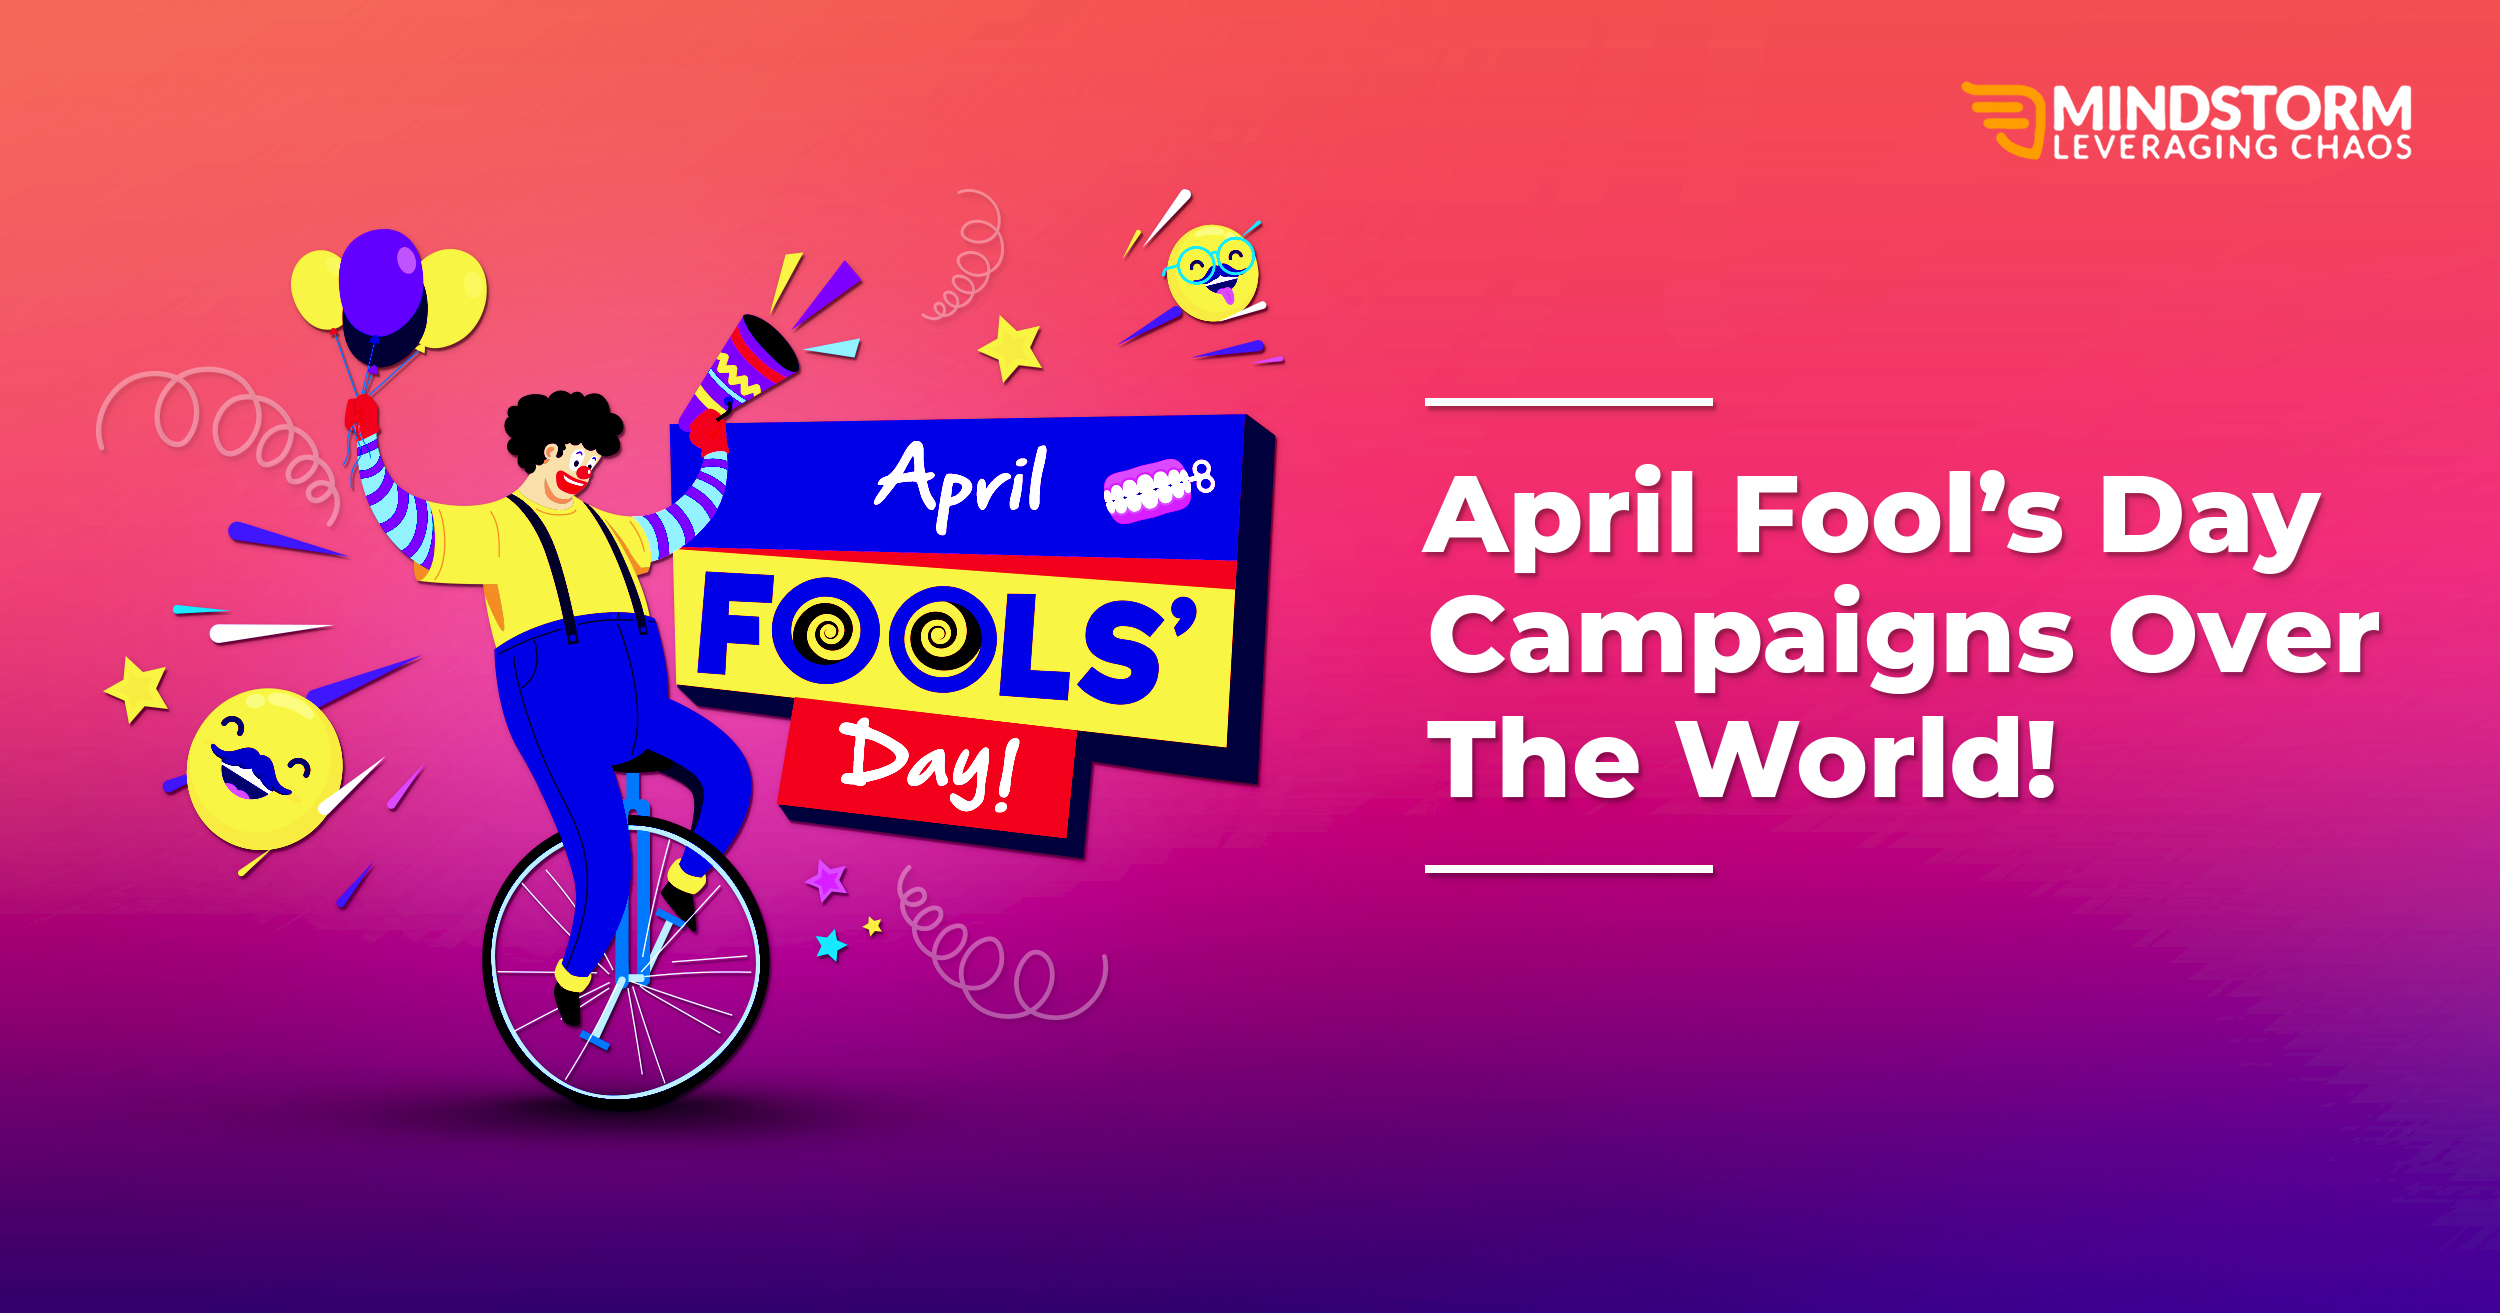 April Fool’s Day Campaigns Over The World!